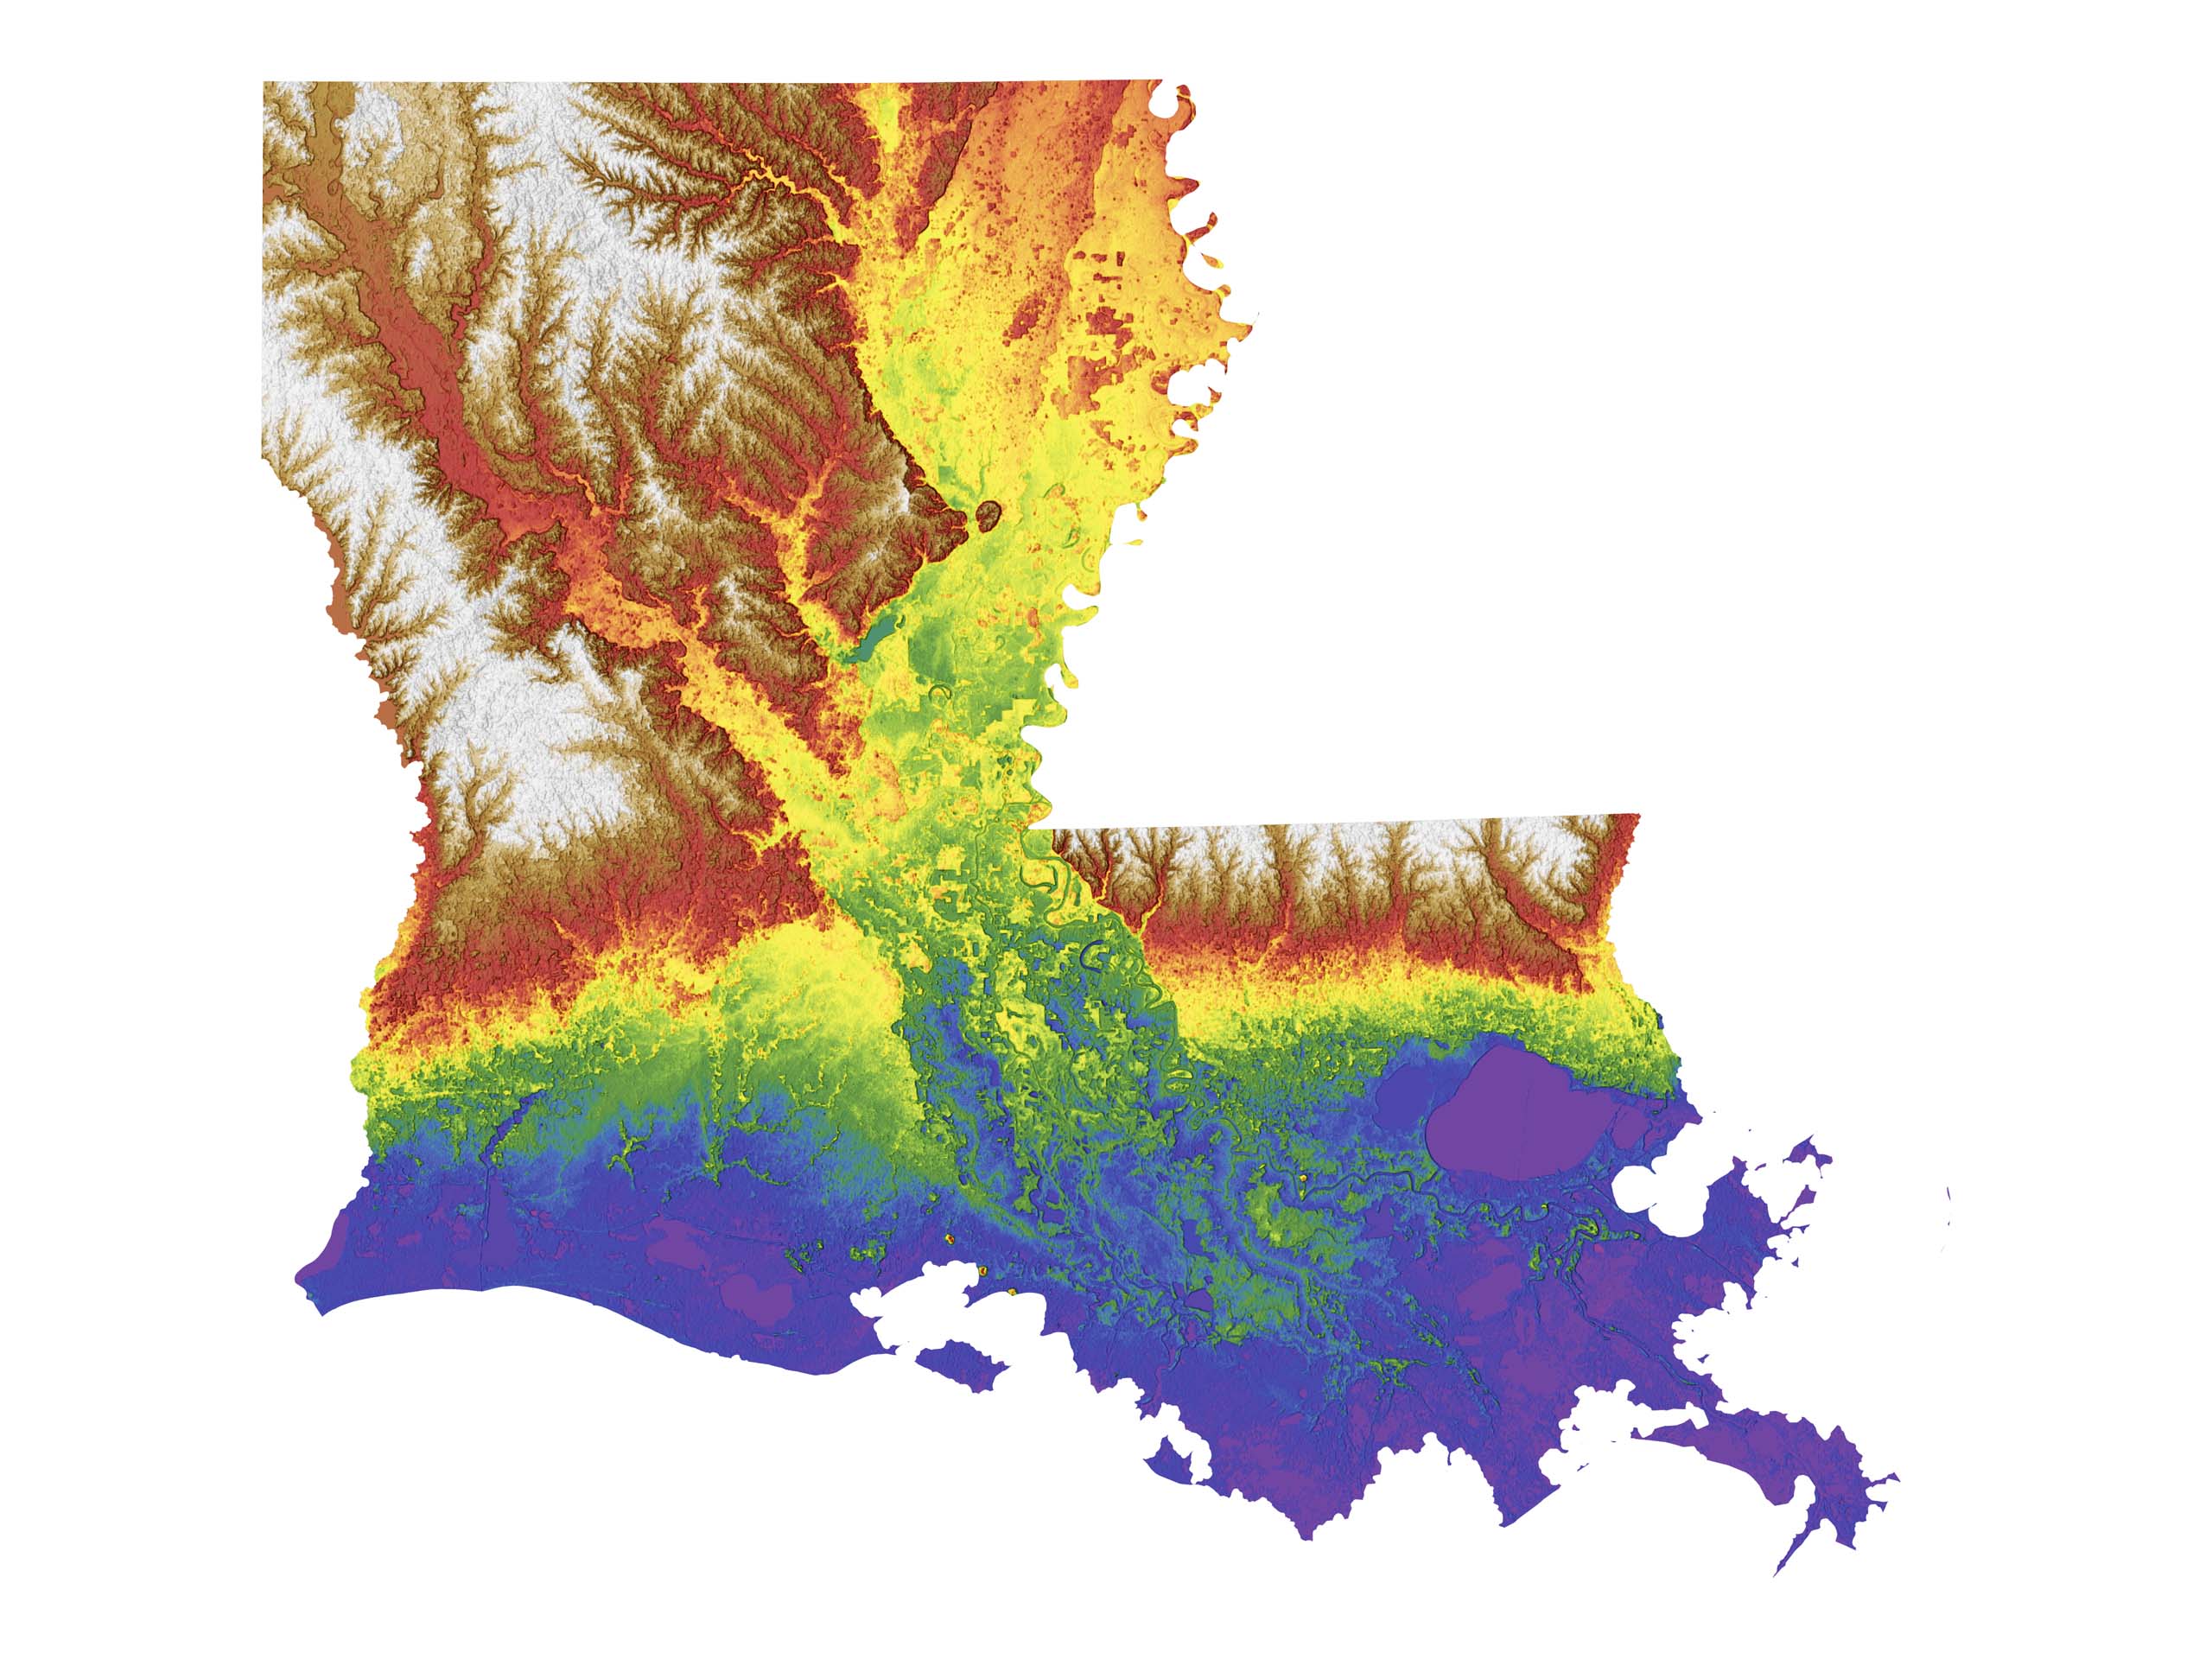 Louisiana Color Elevation Map Wall Art Poster Print With White Background